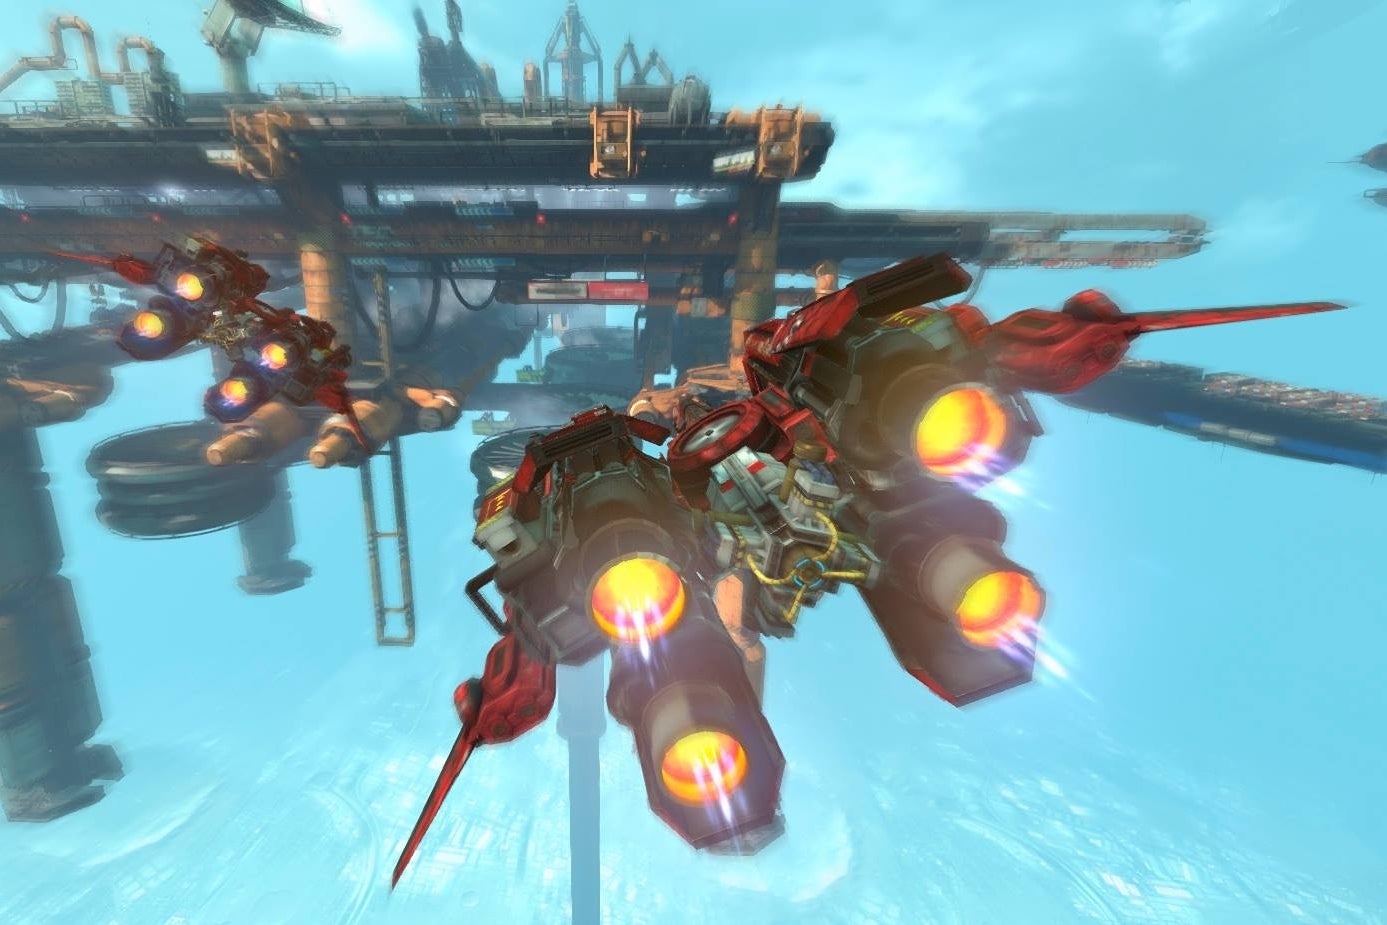 Image for Aerial-combat game Strike Vector's Steam Greenlight trailer looks incredible